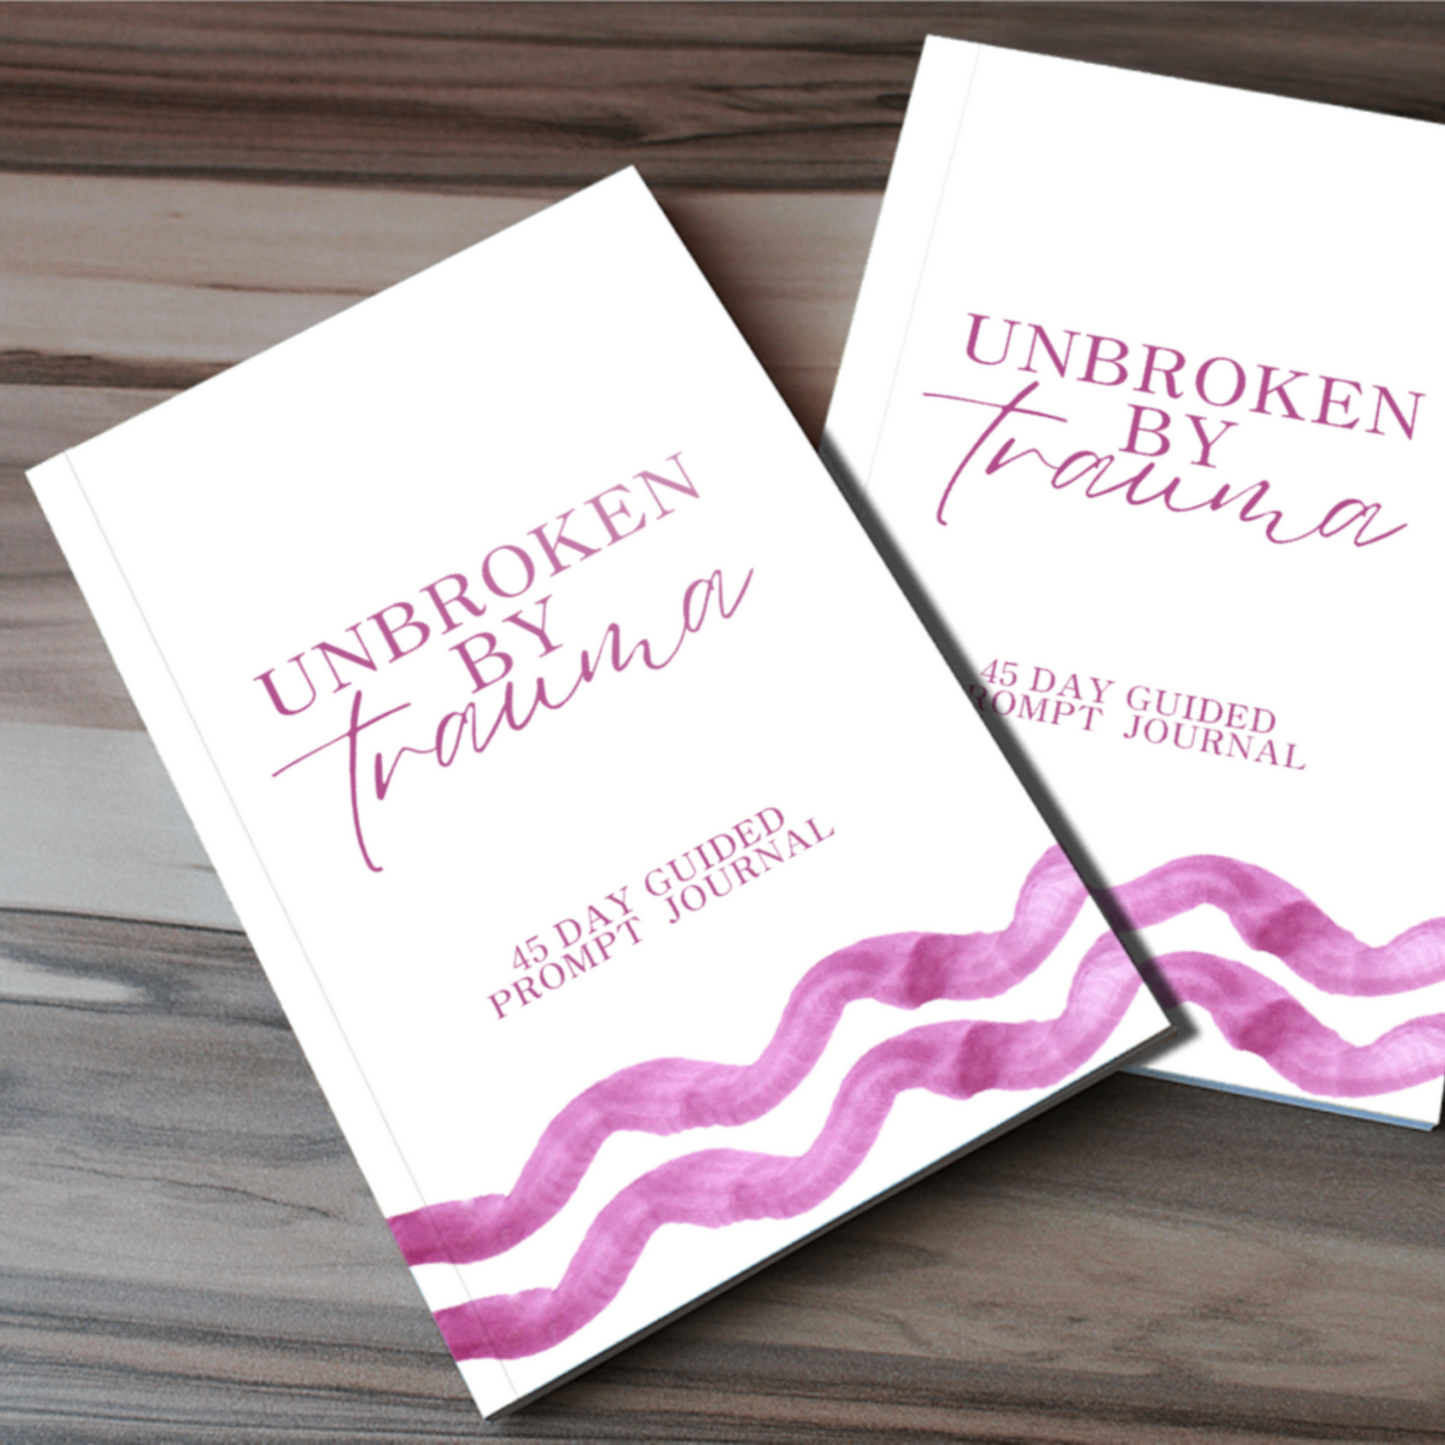 Unbroken by Trauma 45 Day Guided Journal